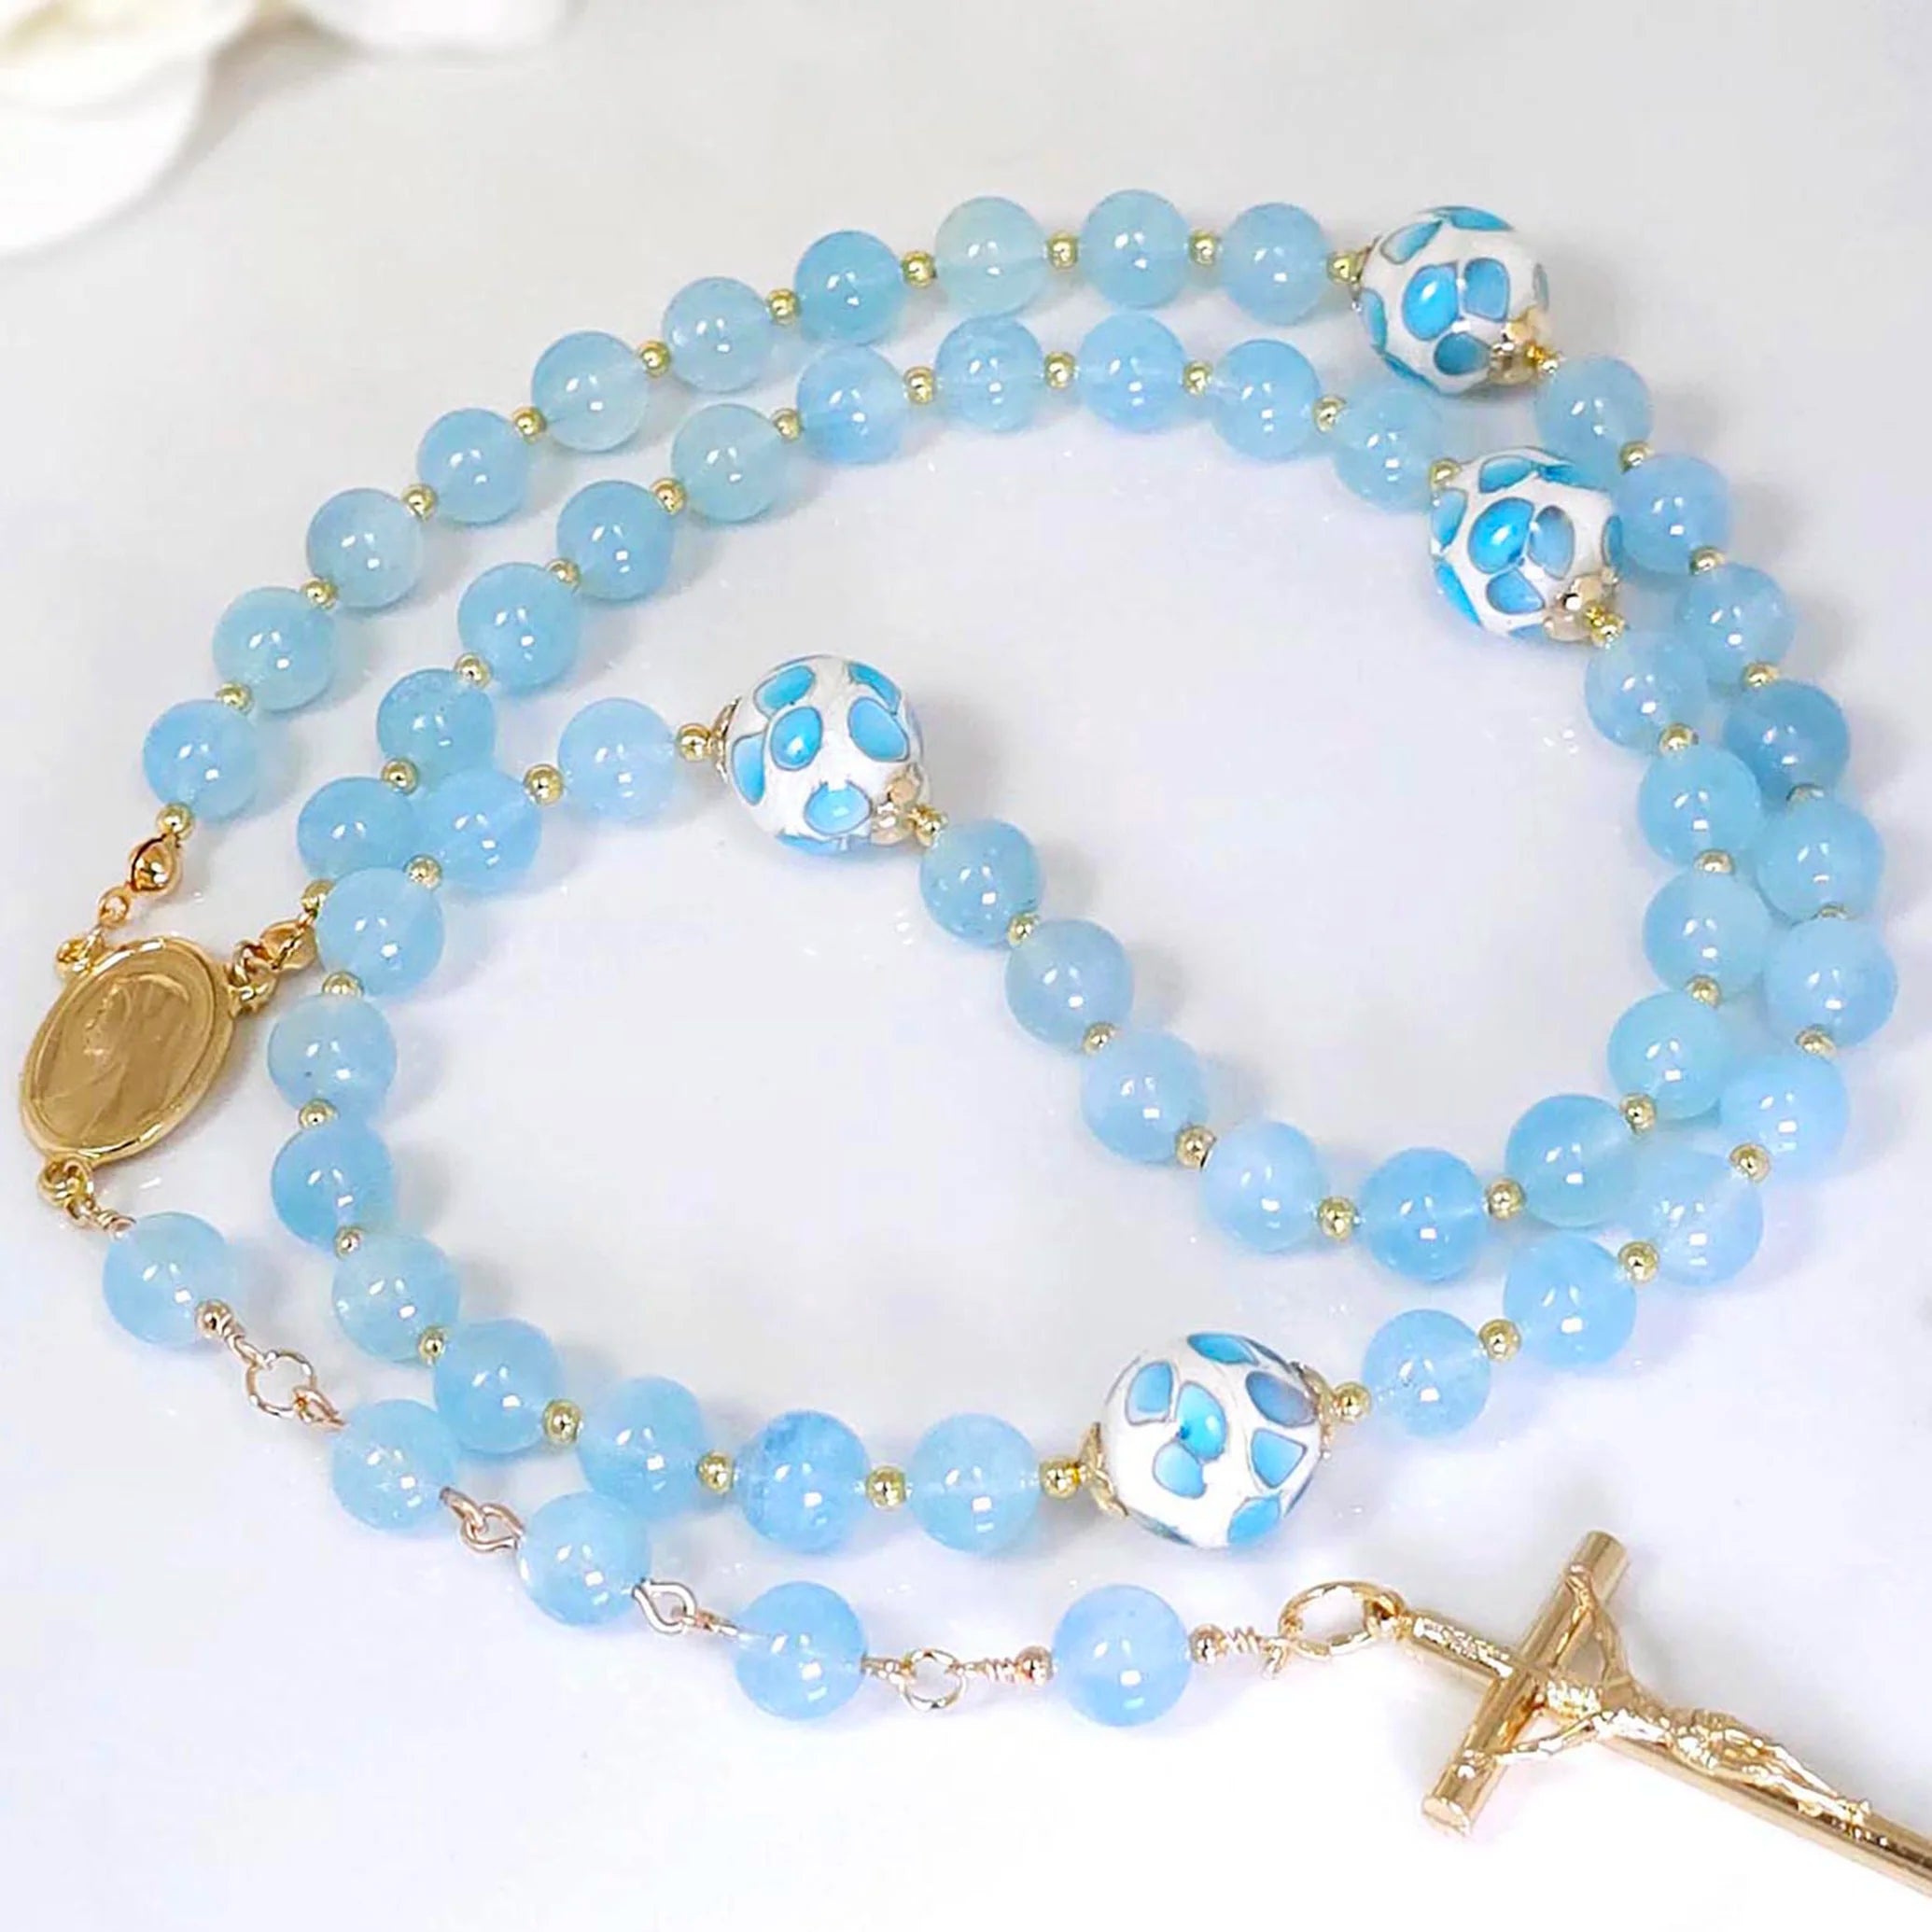 Rosary featuring delicate flower glass beads with a Gold-plated Crucifix pendant and Madonna rosary center, on a white table.